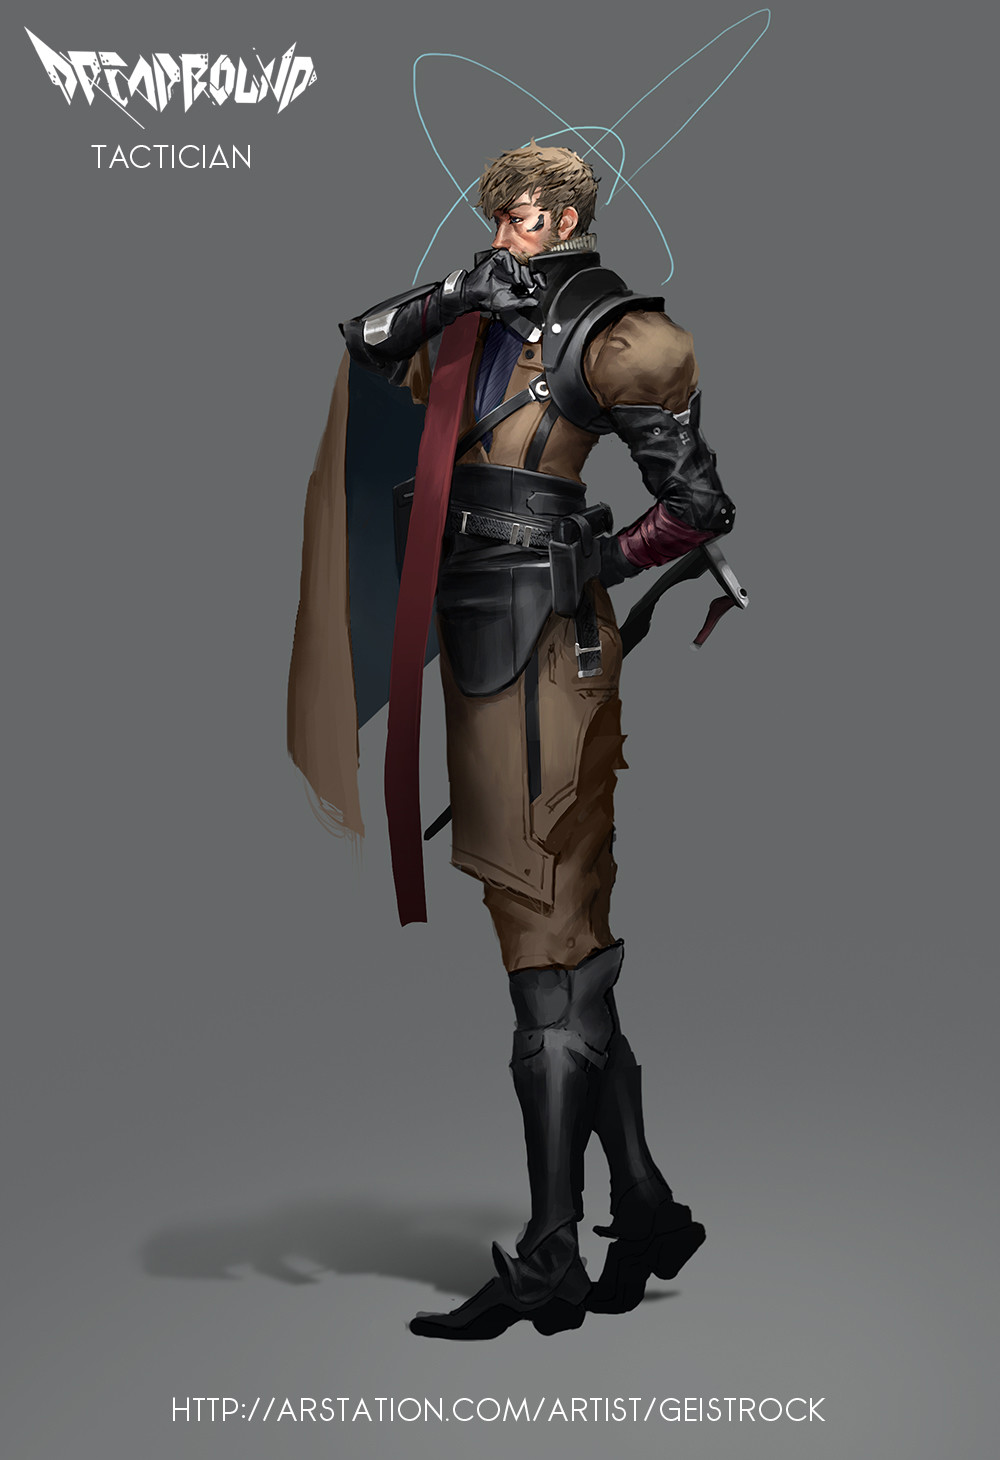 Concept render of Tactician character